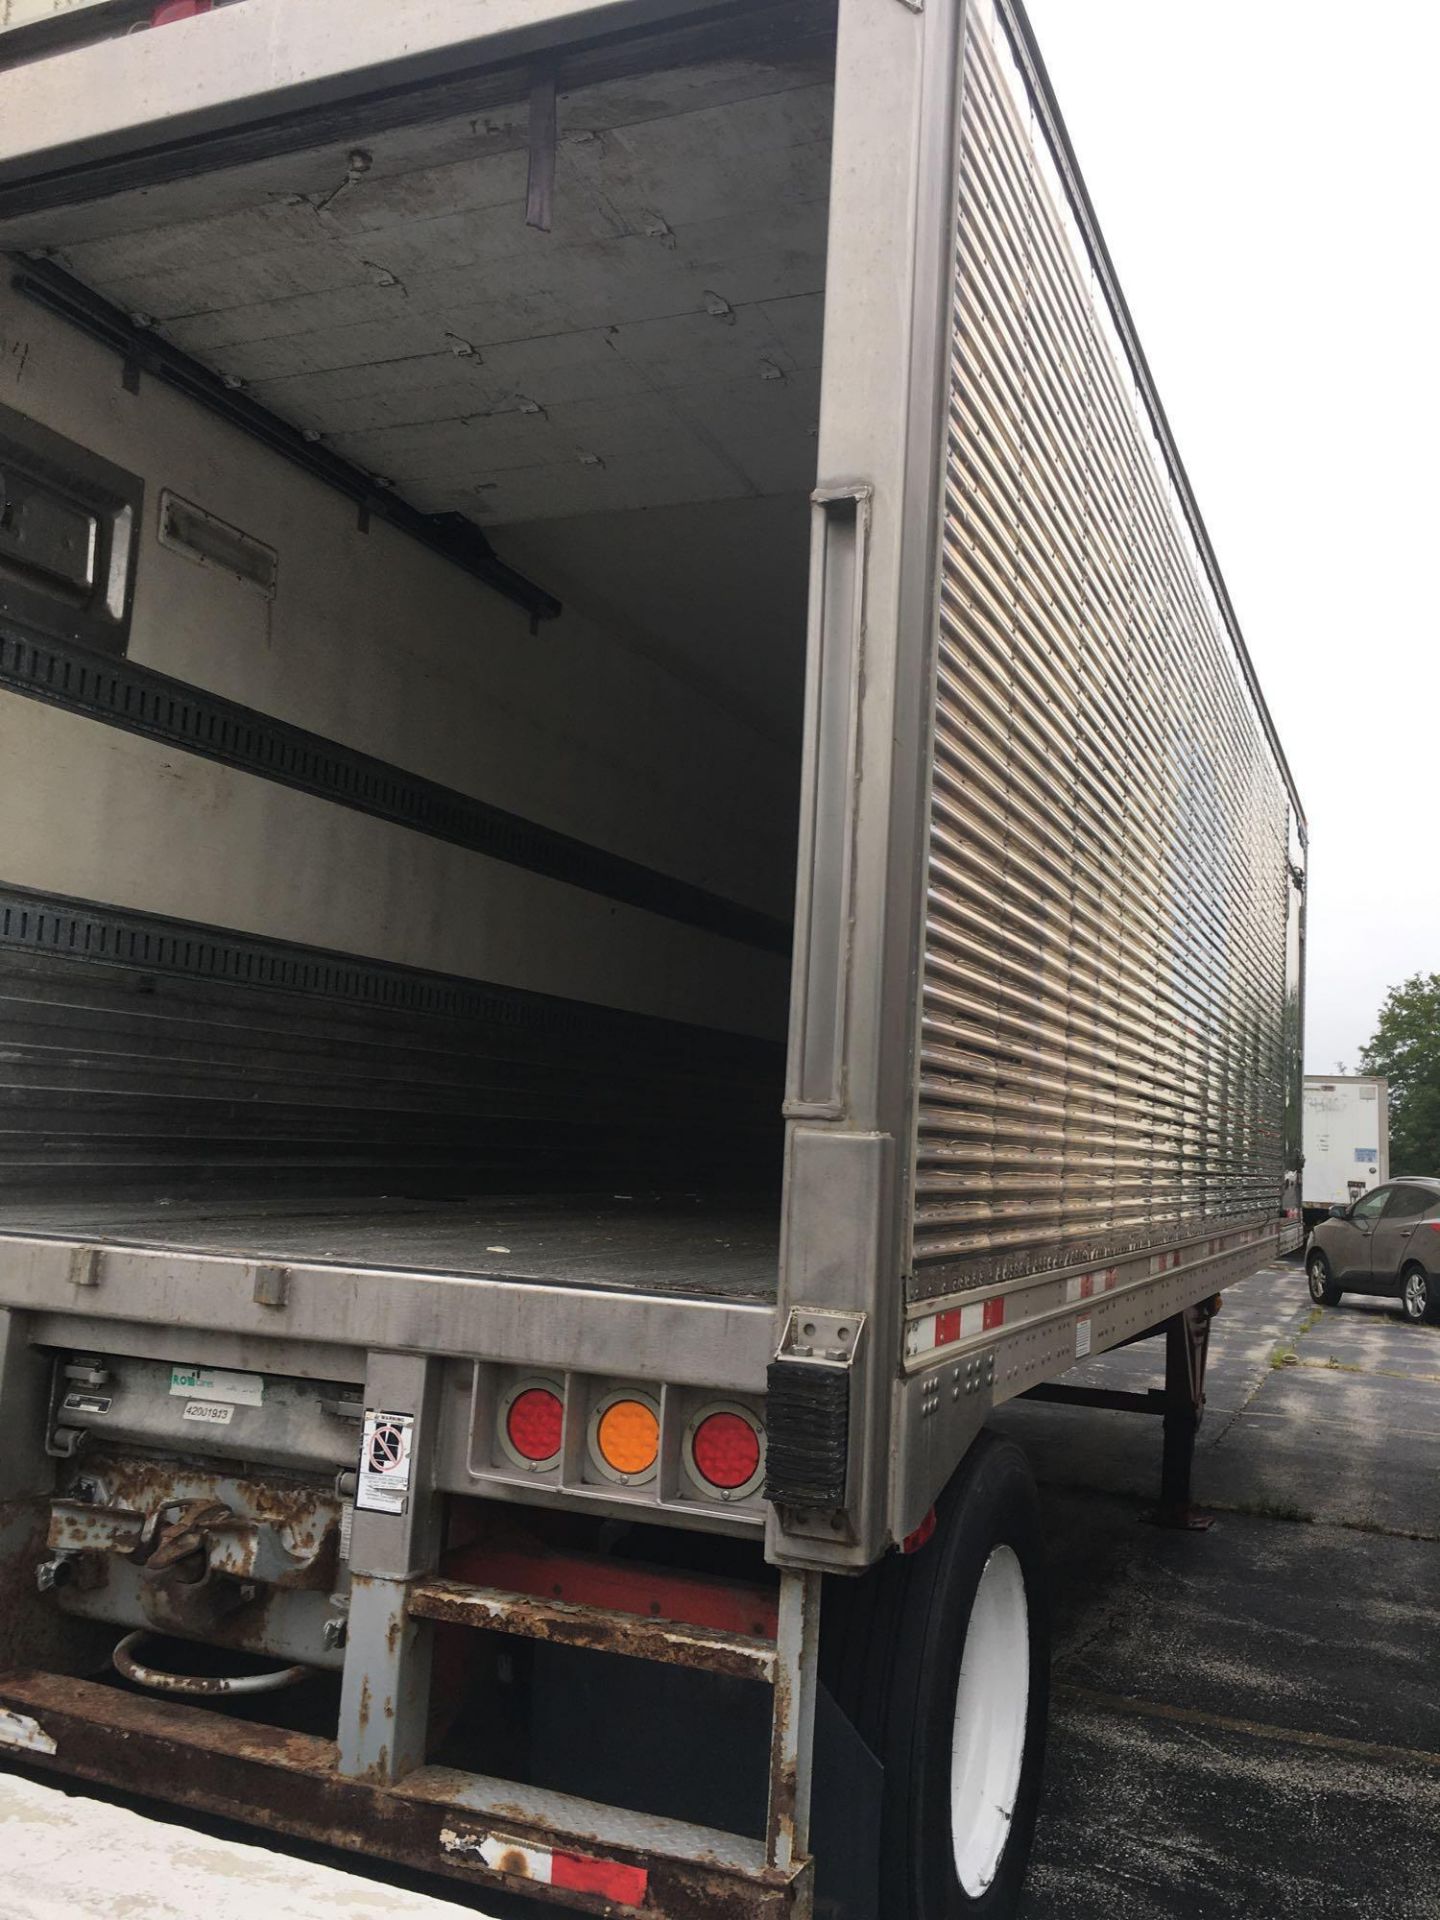 GREAT DANE 29 ft. Stainless Steel Side SA Refrigerated Trailer Carrier Refrrigeration VIN 1GRAA56177 - Image 2 of 7